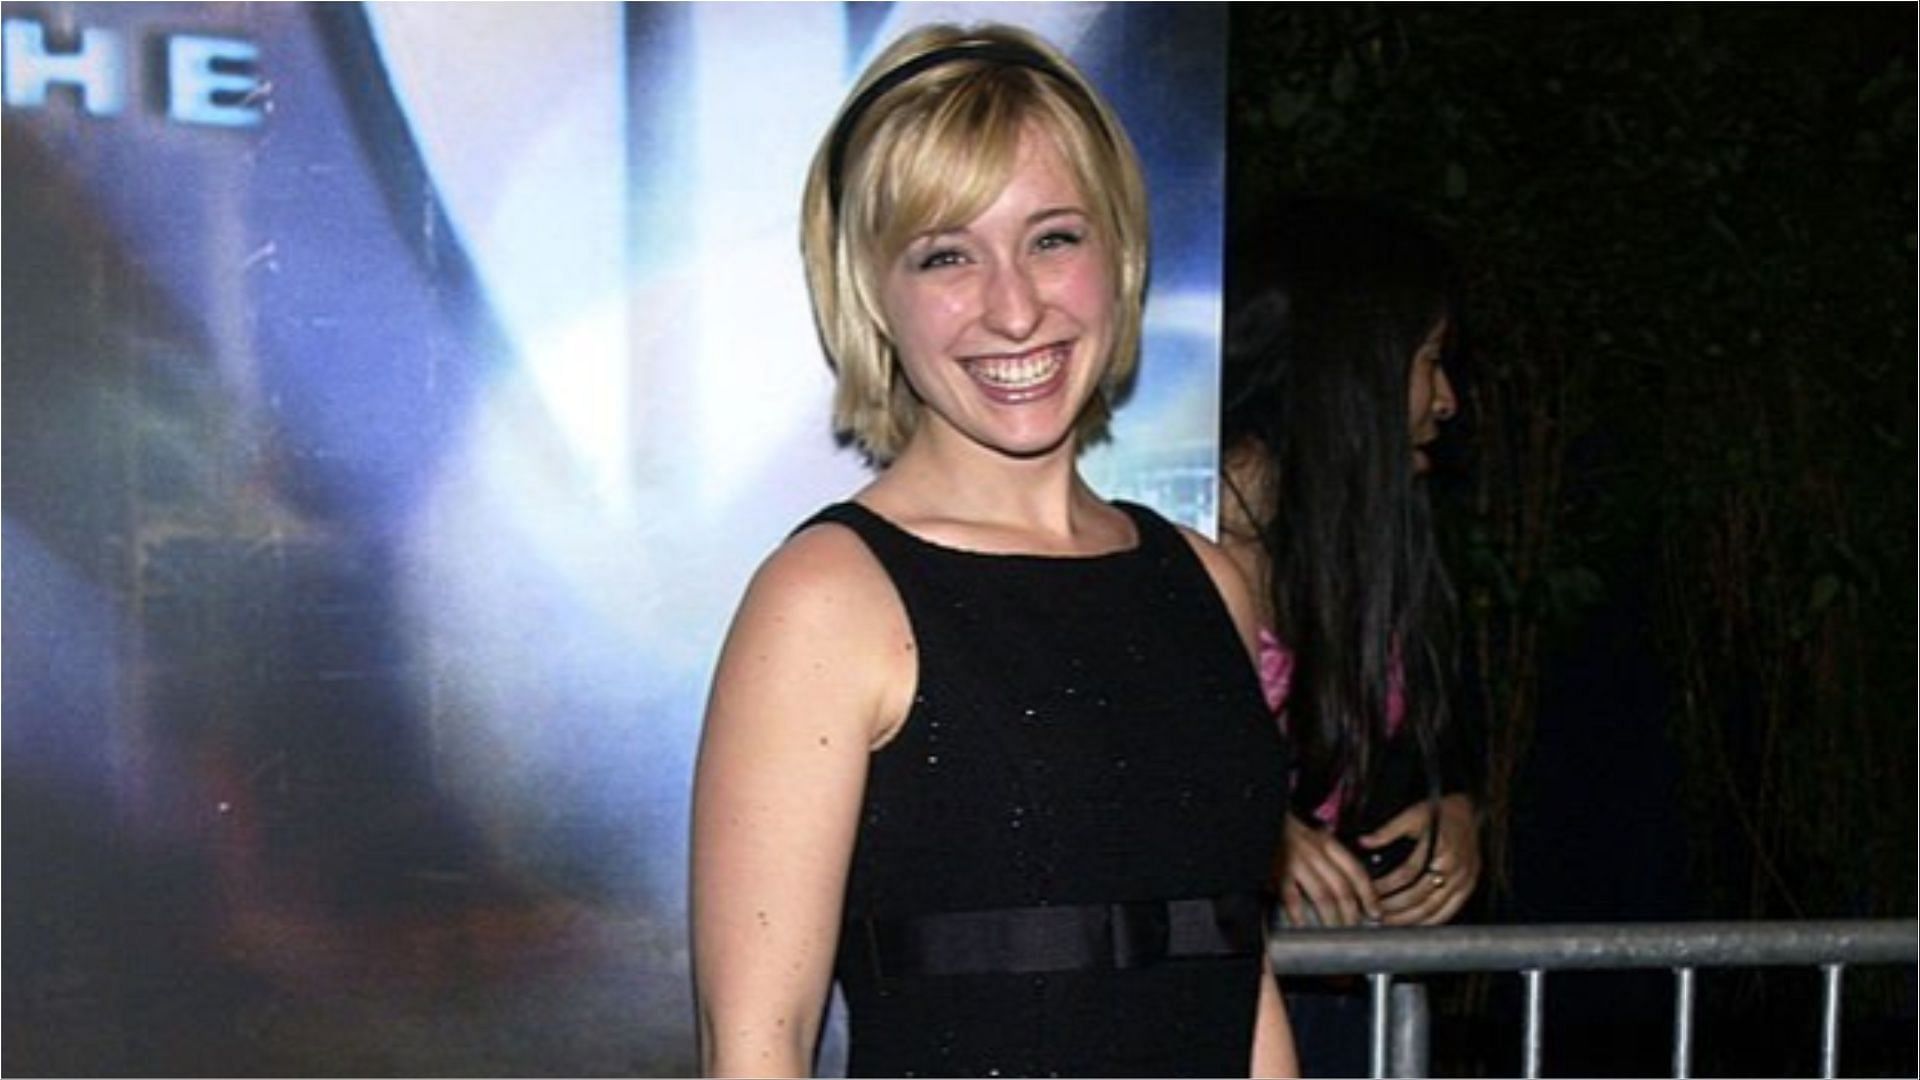 Allison Mack has accumulated a lot of wealth from her career as an actress (Image via Jean-Paul Aussenard/Getty Images)